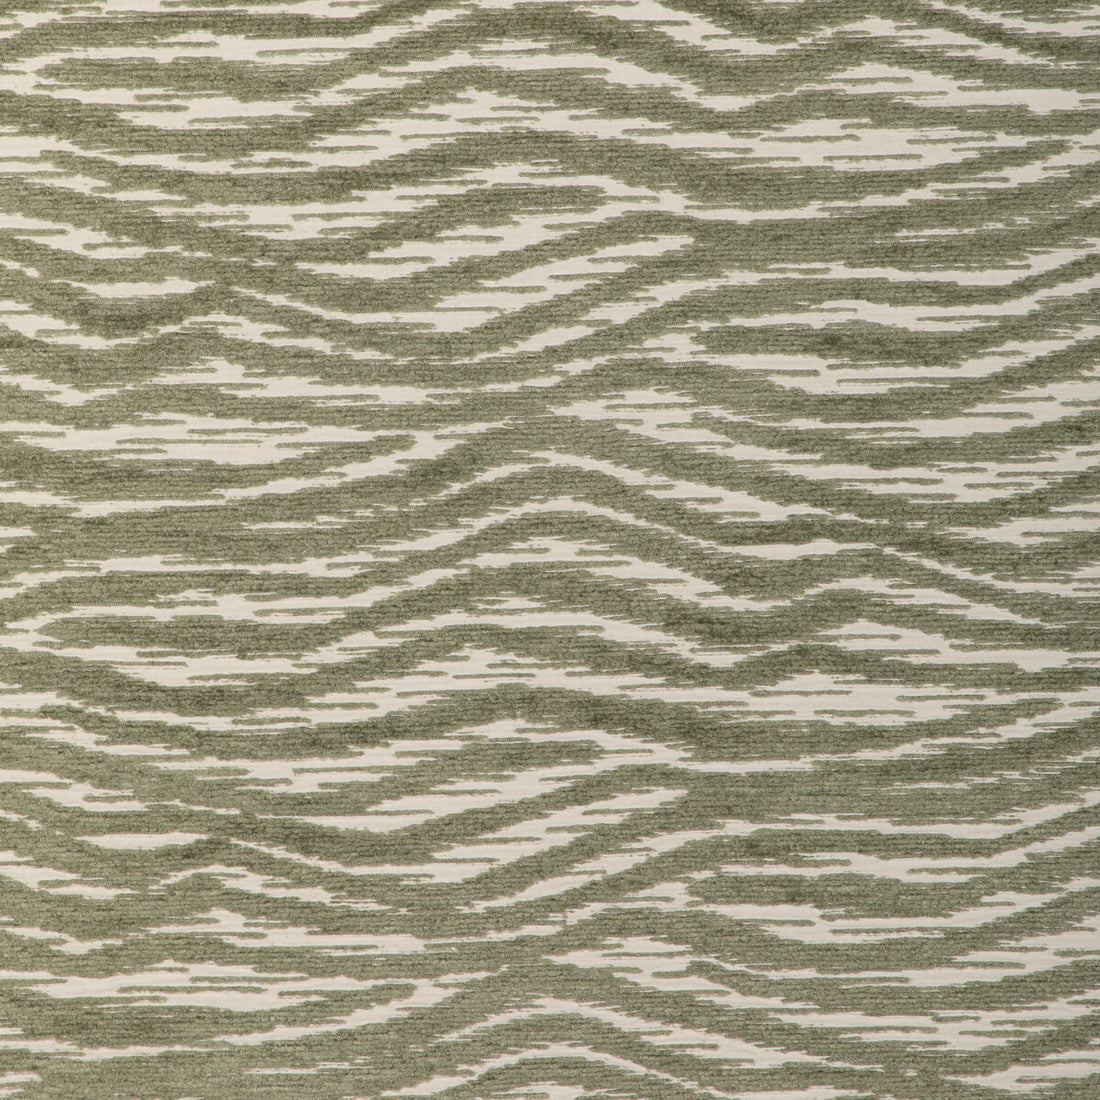 Tuscan Ripples fabric in lichen color - pattern 36899.3.0 - by Kravet Couture in the Atelier Weaves collection